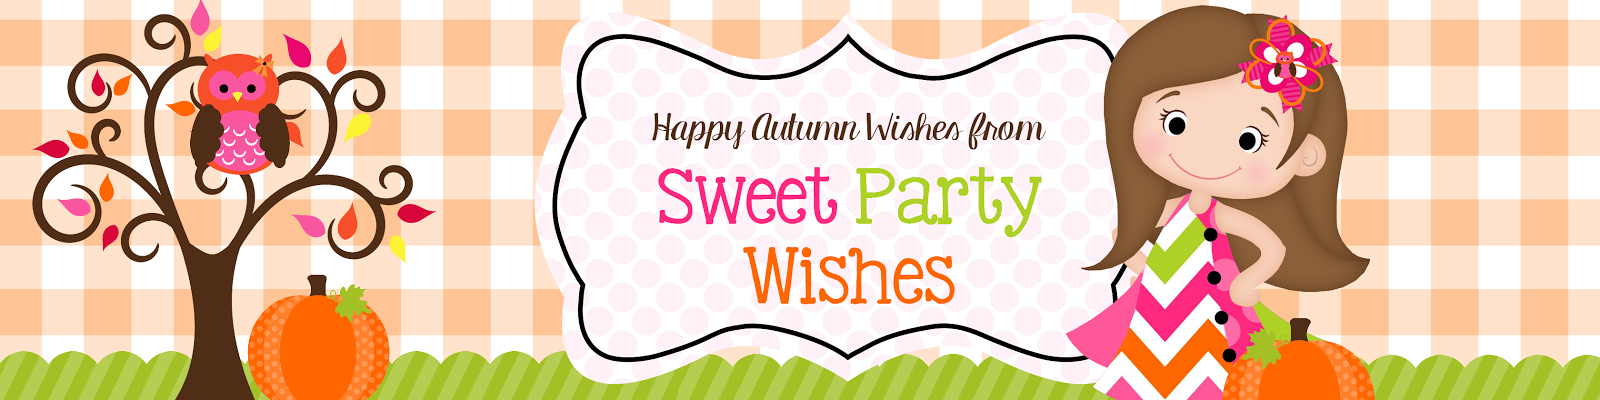 Sweet Party Wishes